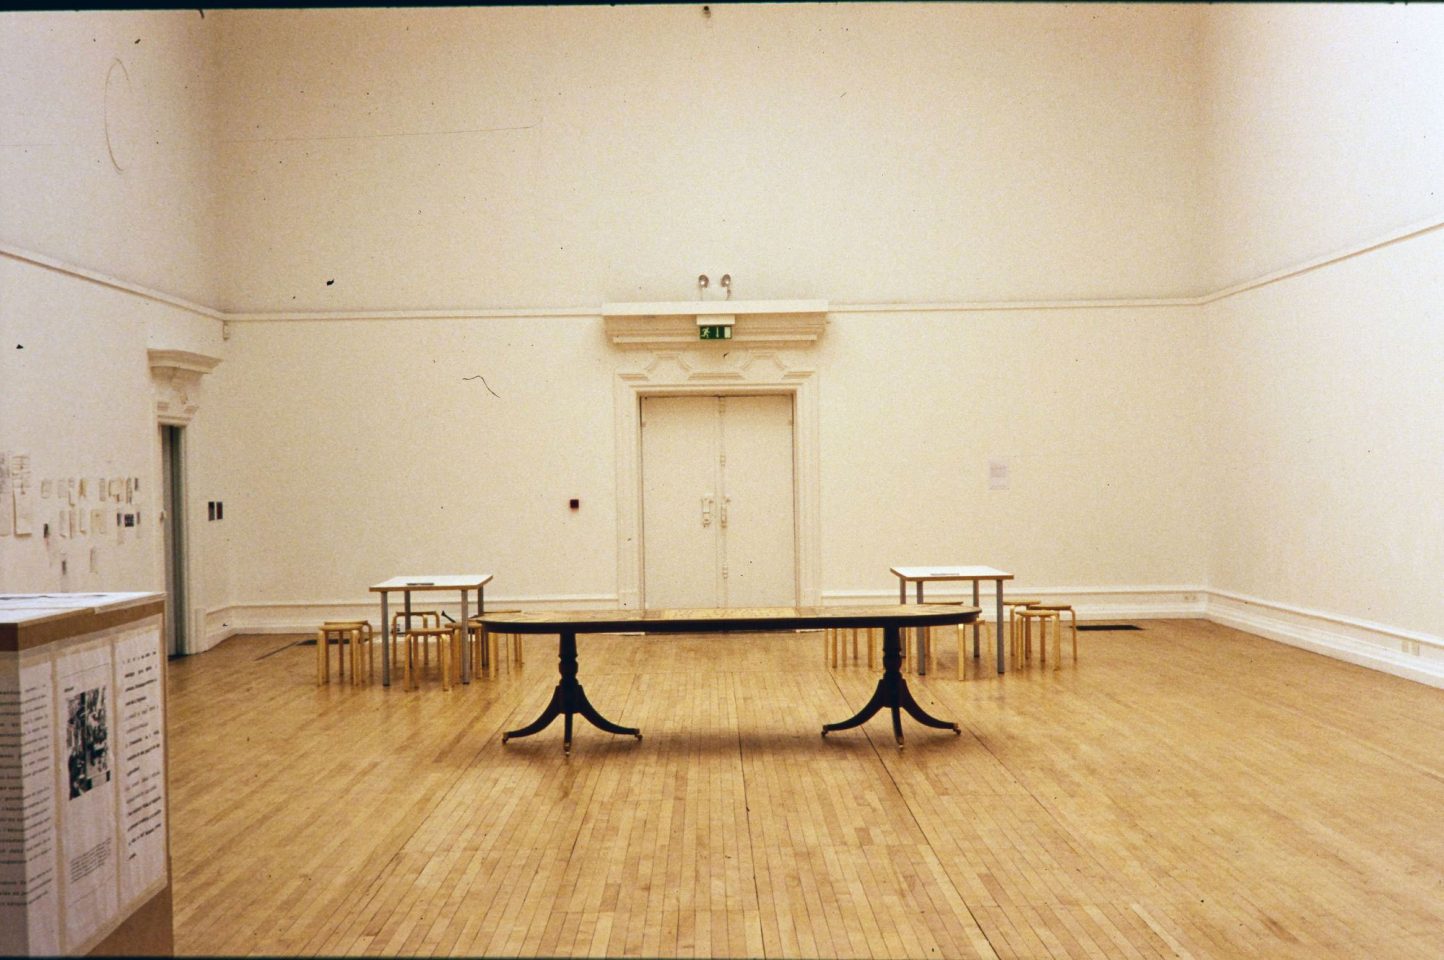 Installation view from 2004 exhibition Perfectly Placed.
